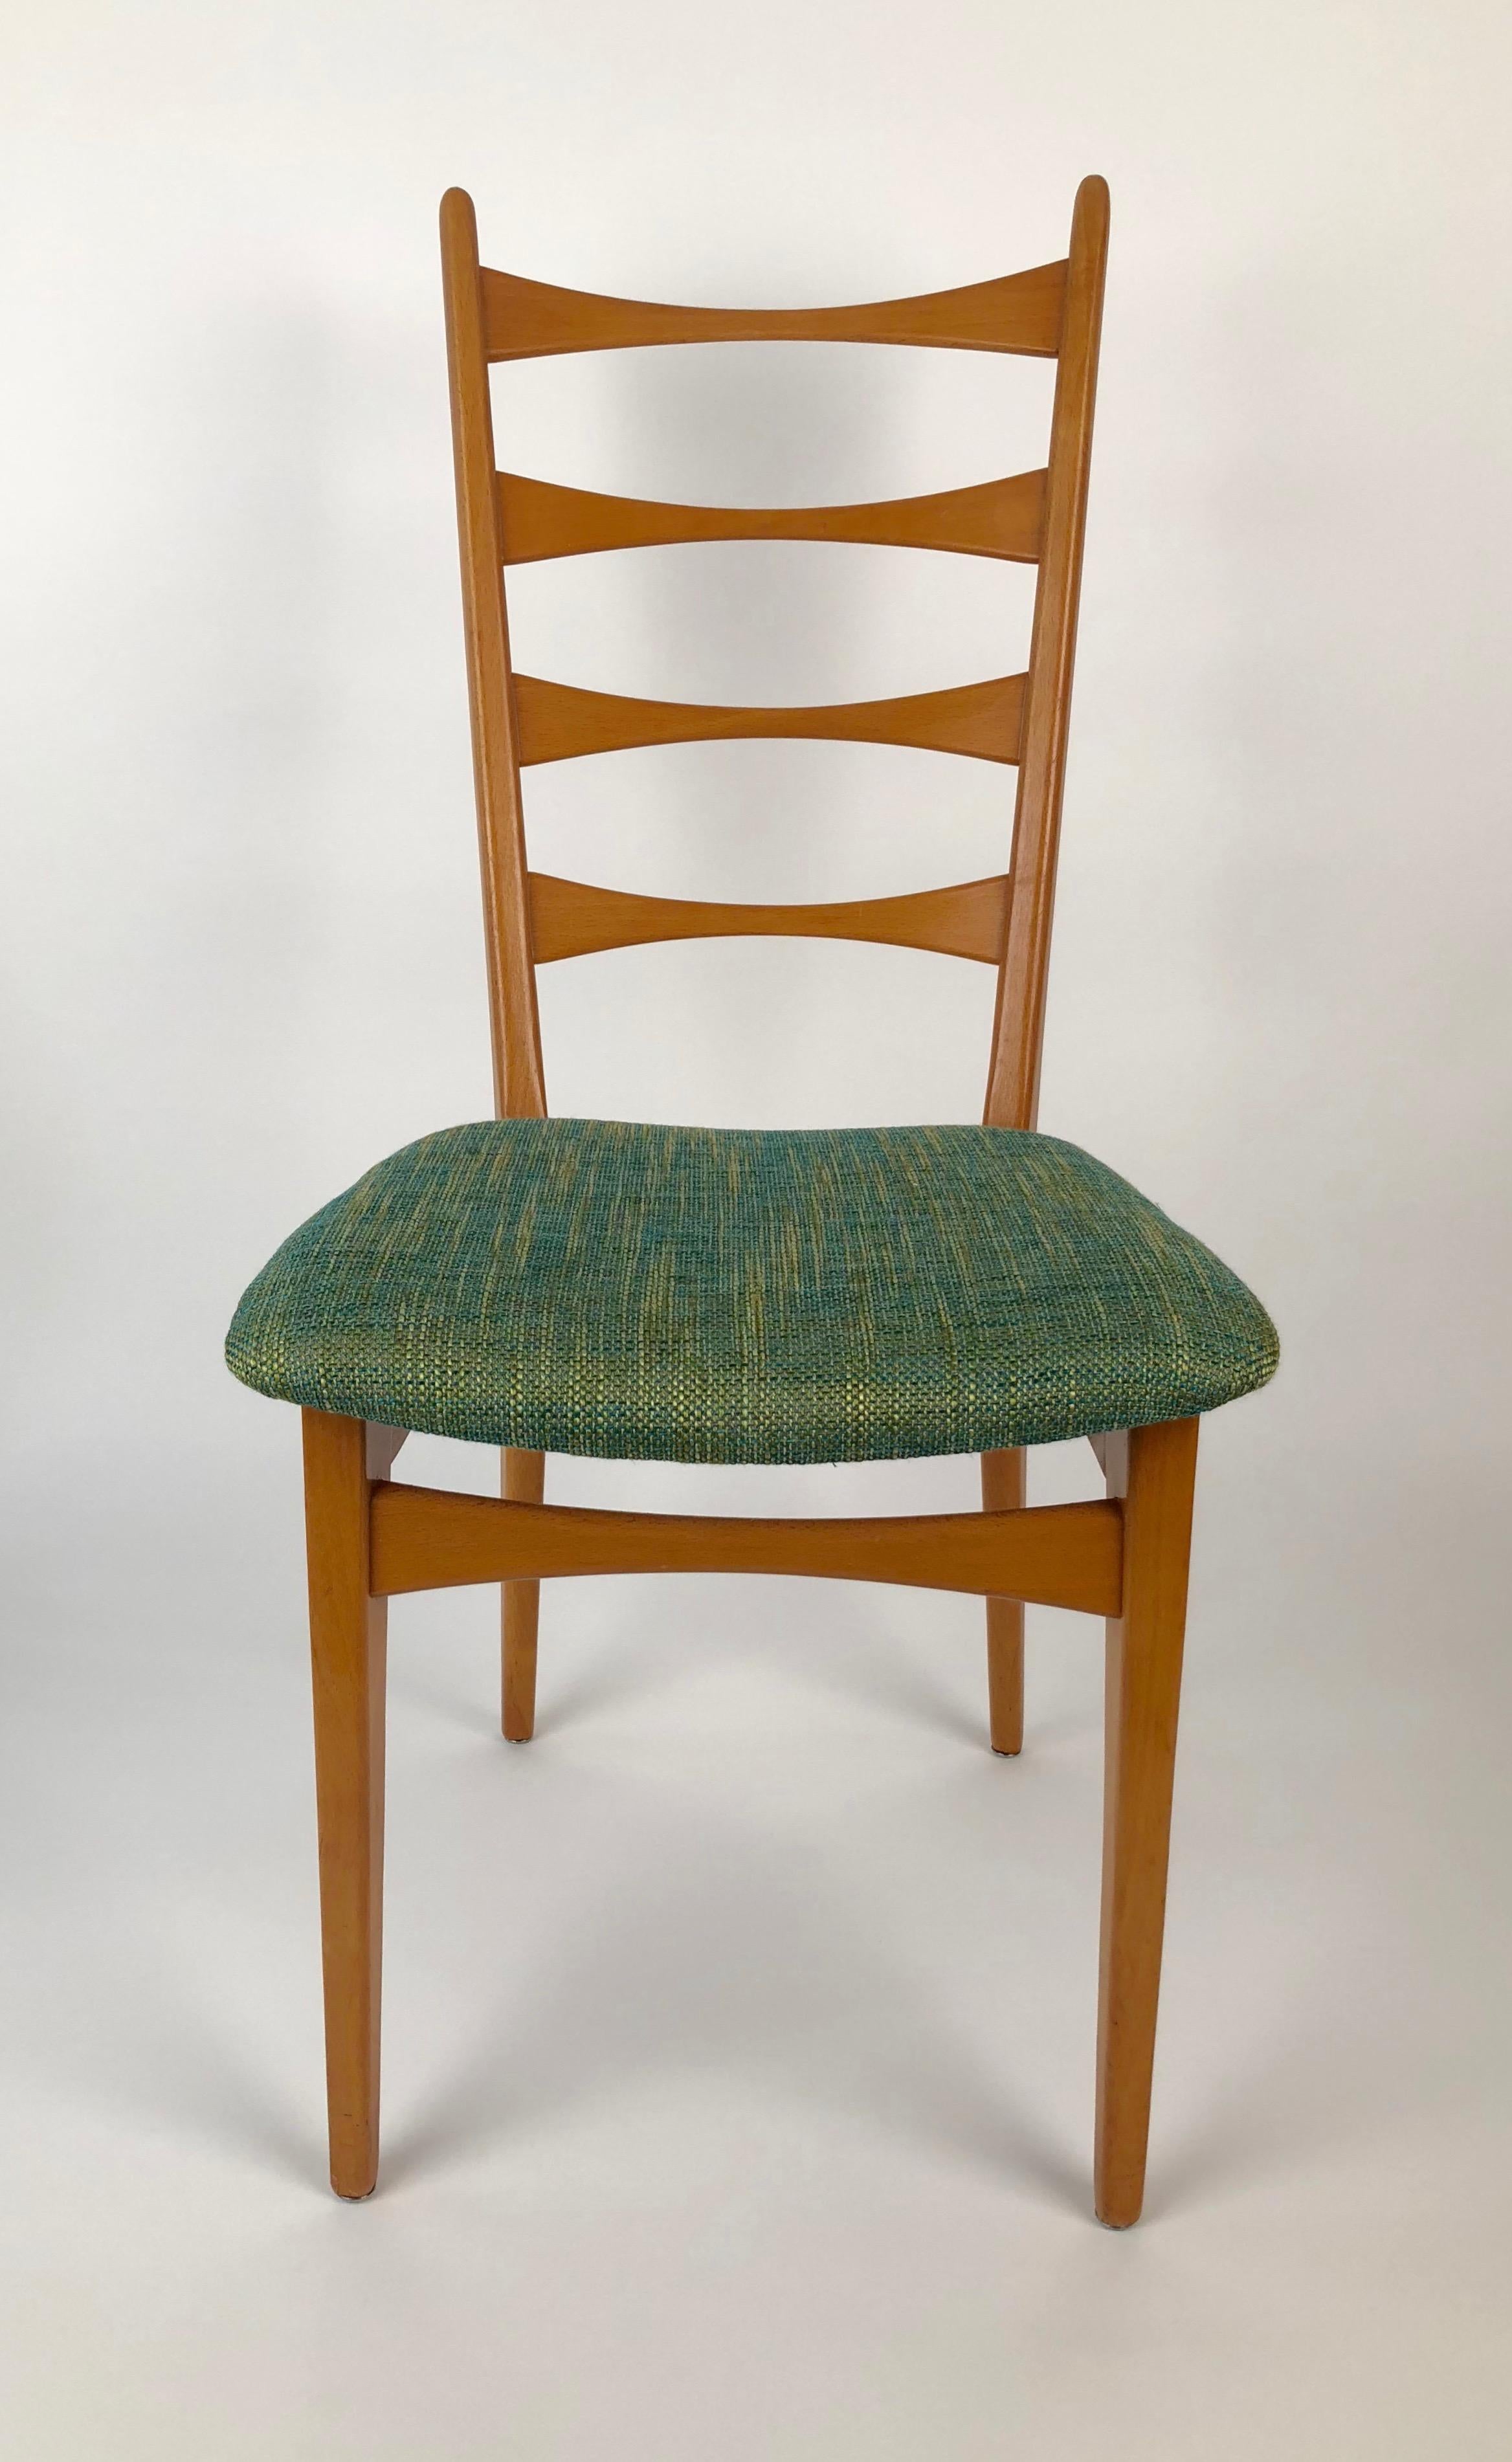 Six Danish Modern Midcentury Ladder Back Dinning Chairs In Good Condition For Sale In Vienna, Austria